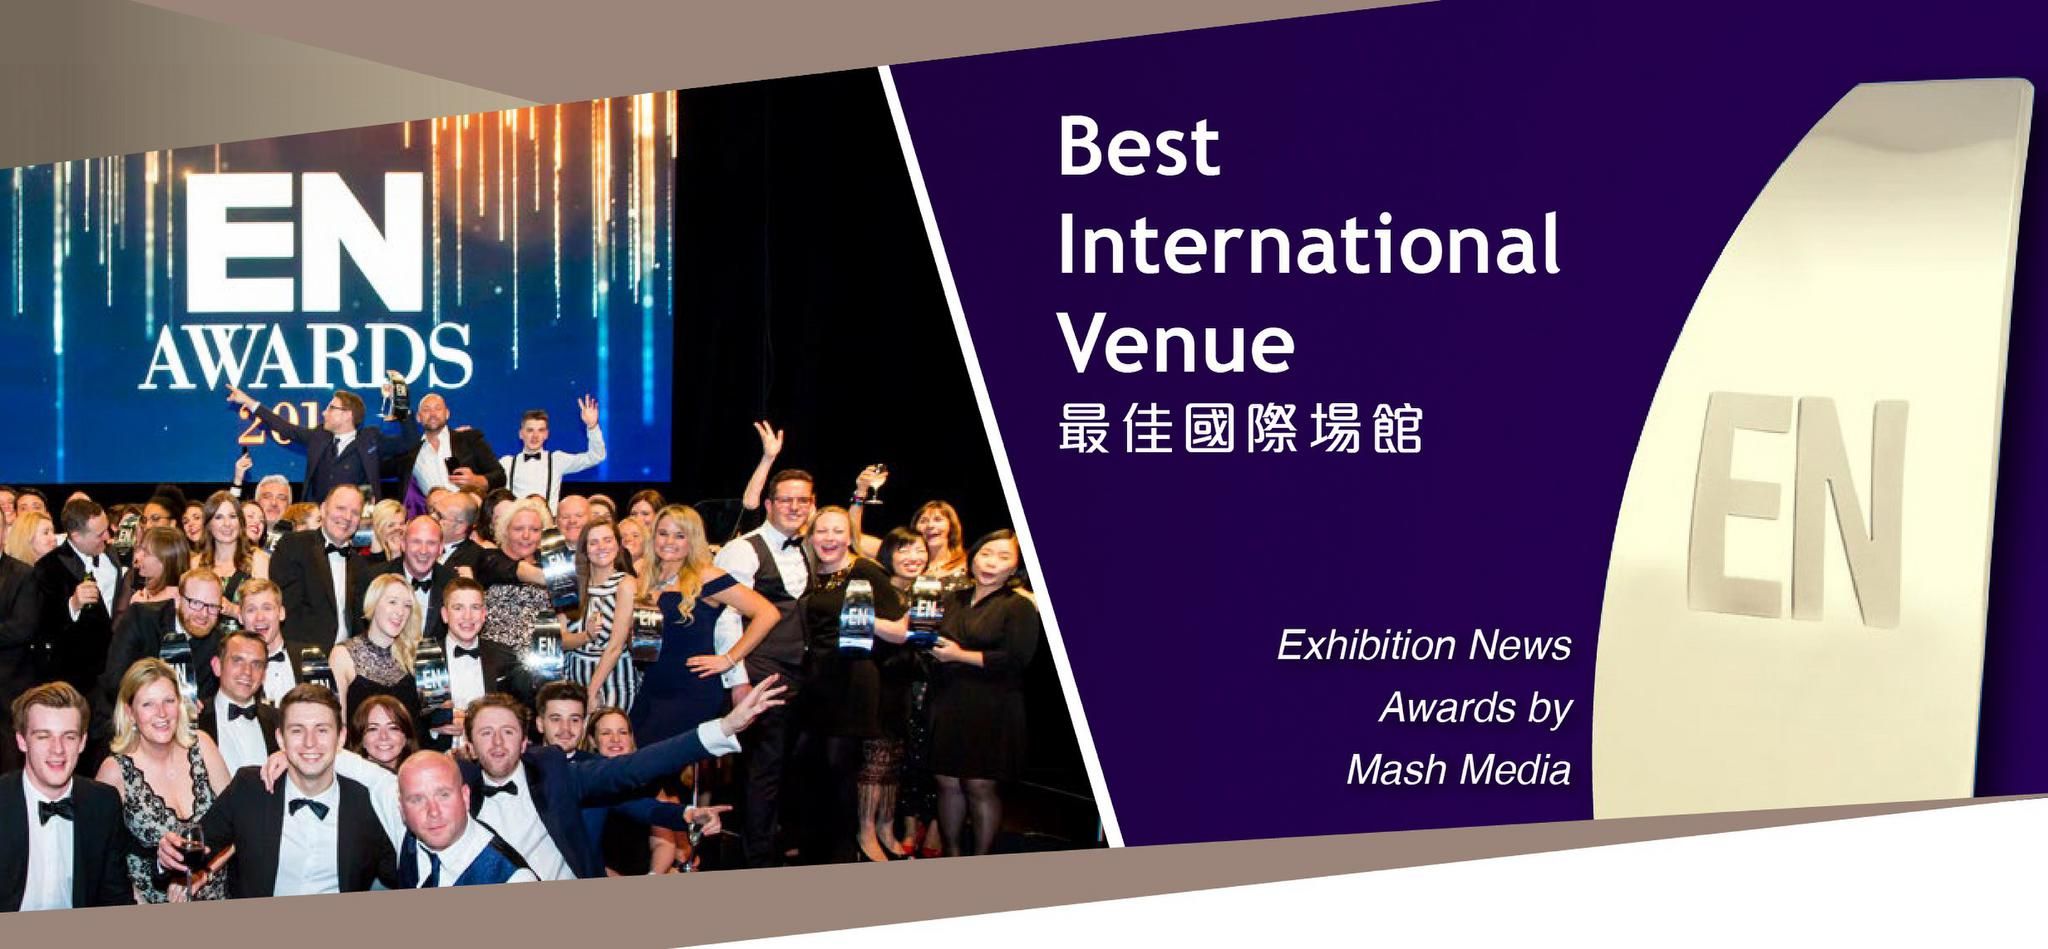 AsiaWorld-Expo is awarded as Best International Venue